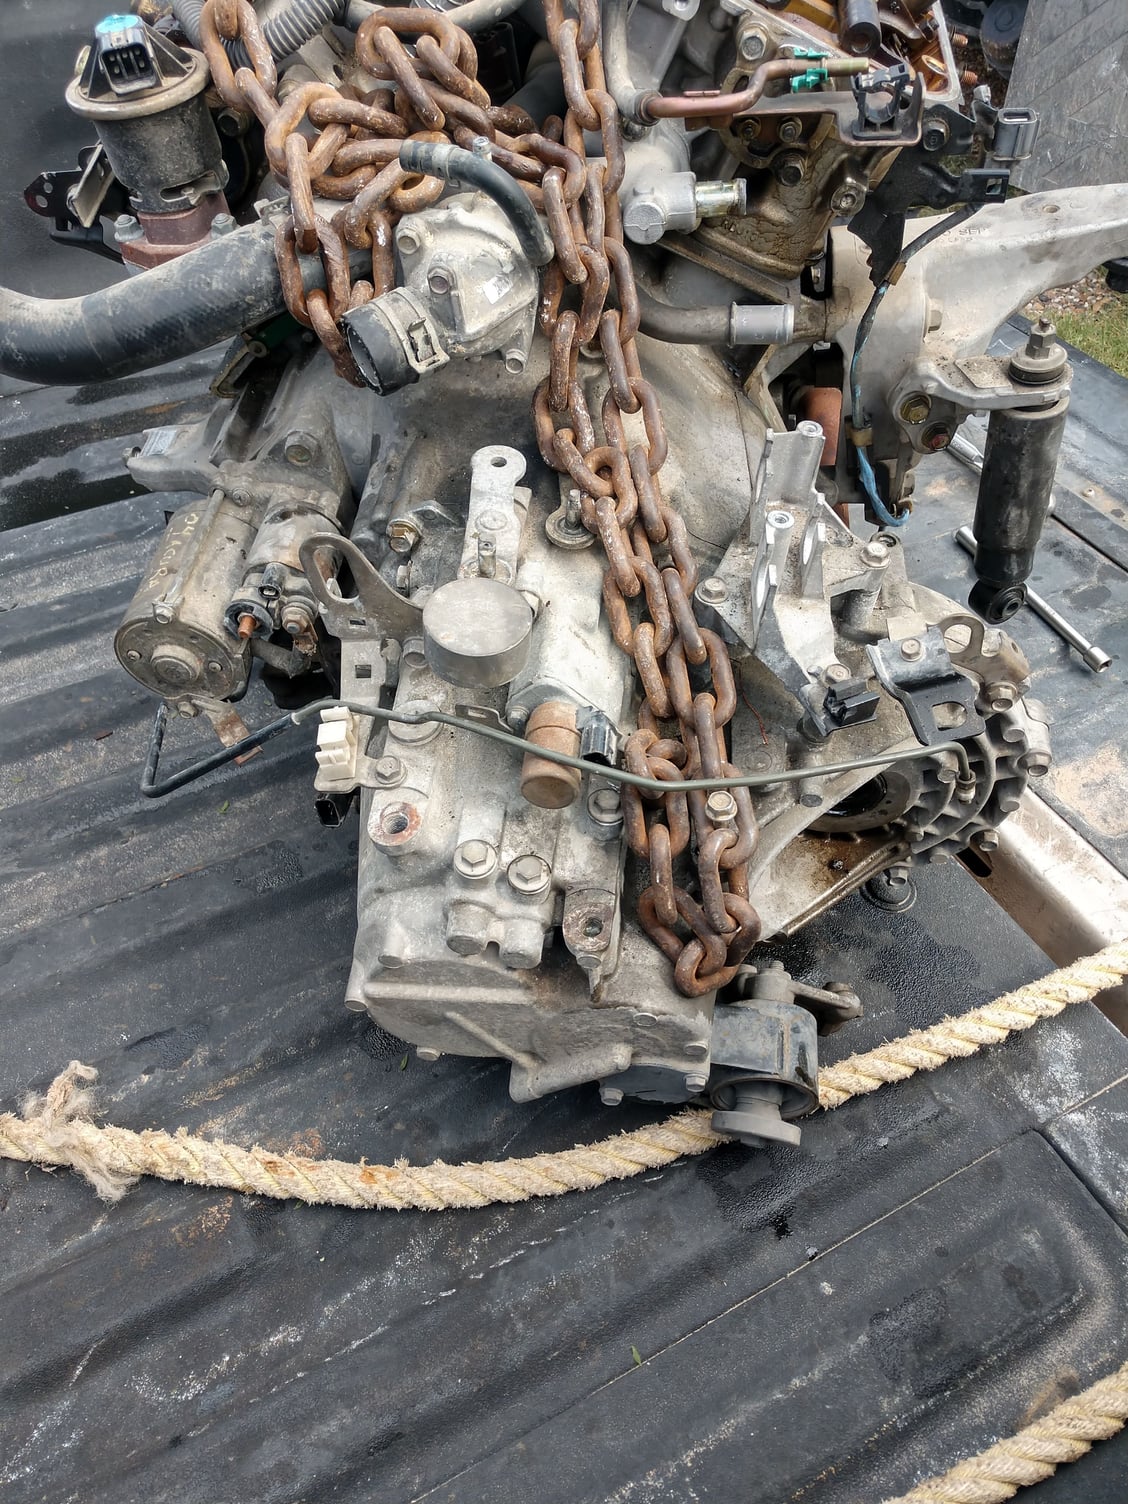 Drivetrain - EXPIRED: FS: j32a3 6speed lsd transmission - Used - 2004 to 2008 Acura TL - Brownsville, TX 78520, United States